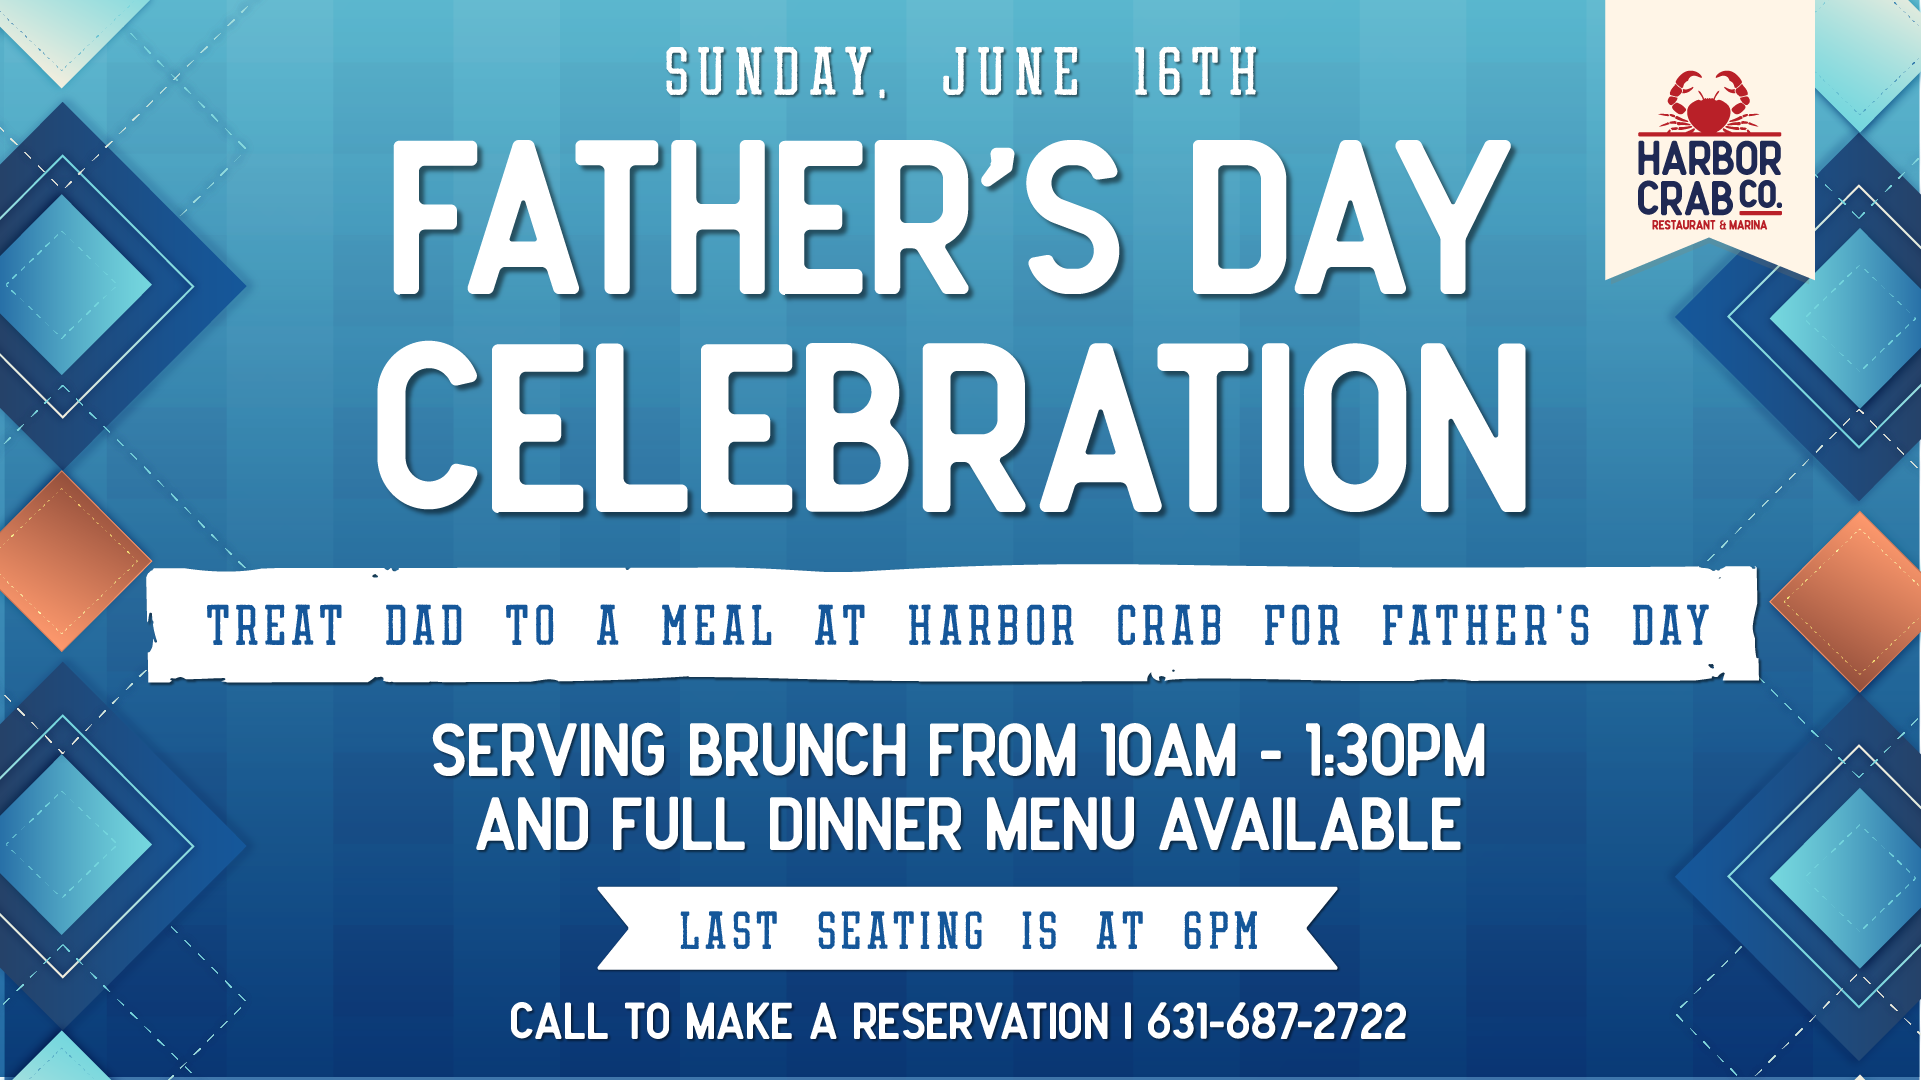 Father's Day Celebration at Harbor Crab on June 16th with brunch from 10am-1:30pm and dinner until 6pm.